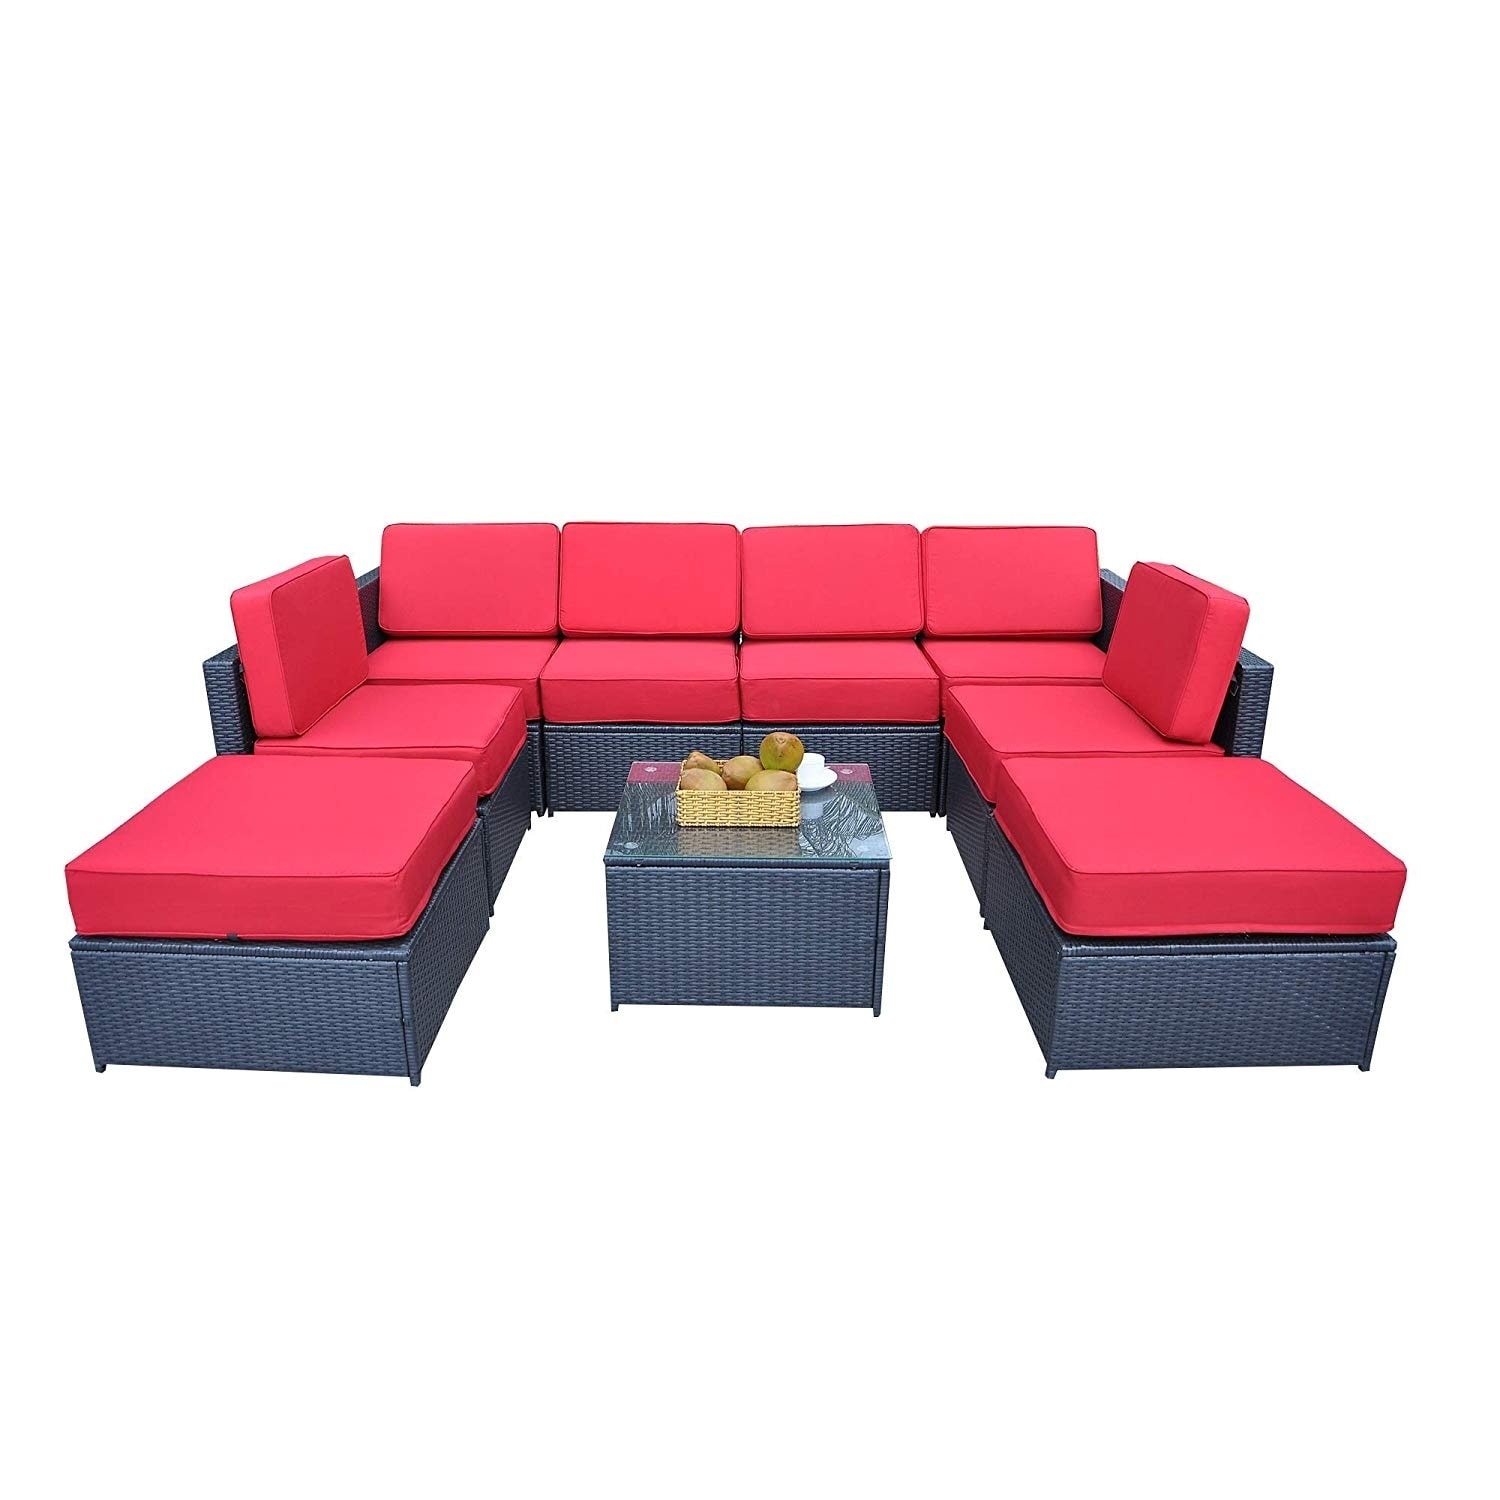 6080 Coffee Table MCombo DIY Outdoor Garden Patio Wicker Sofa Sectional Couch Chair Rattan Deluxe Aluminum Frame Furniture Sofa Cushioned Table Seats 